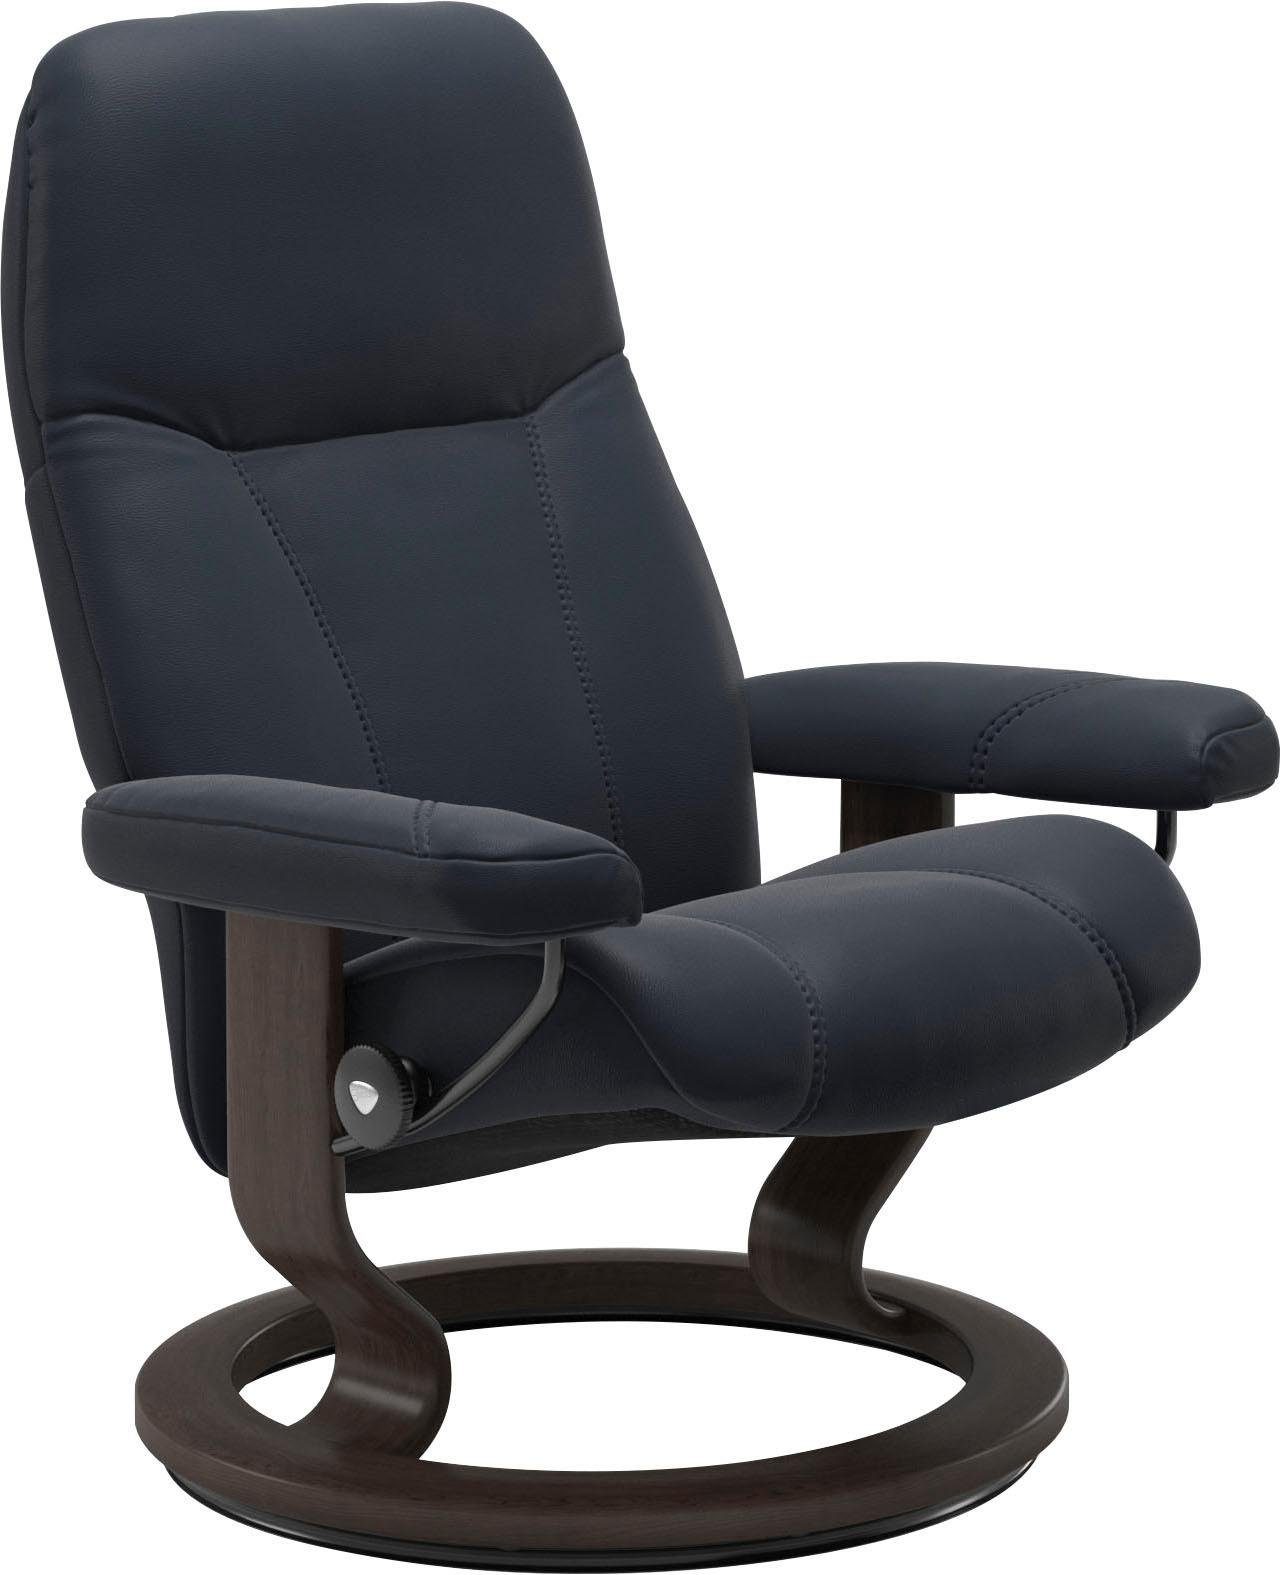 Consul, mit Gestell L, Stressless® Relaxsessel Wenge Größe Classic Base,